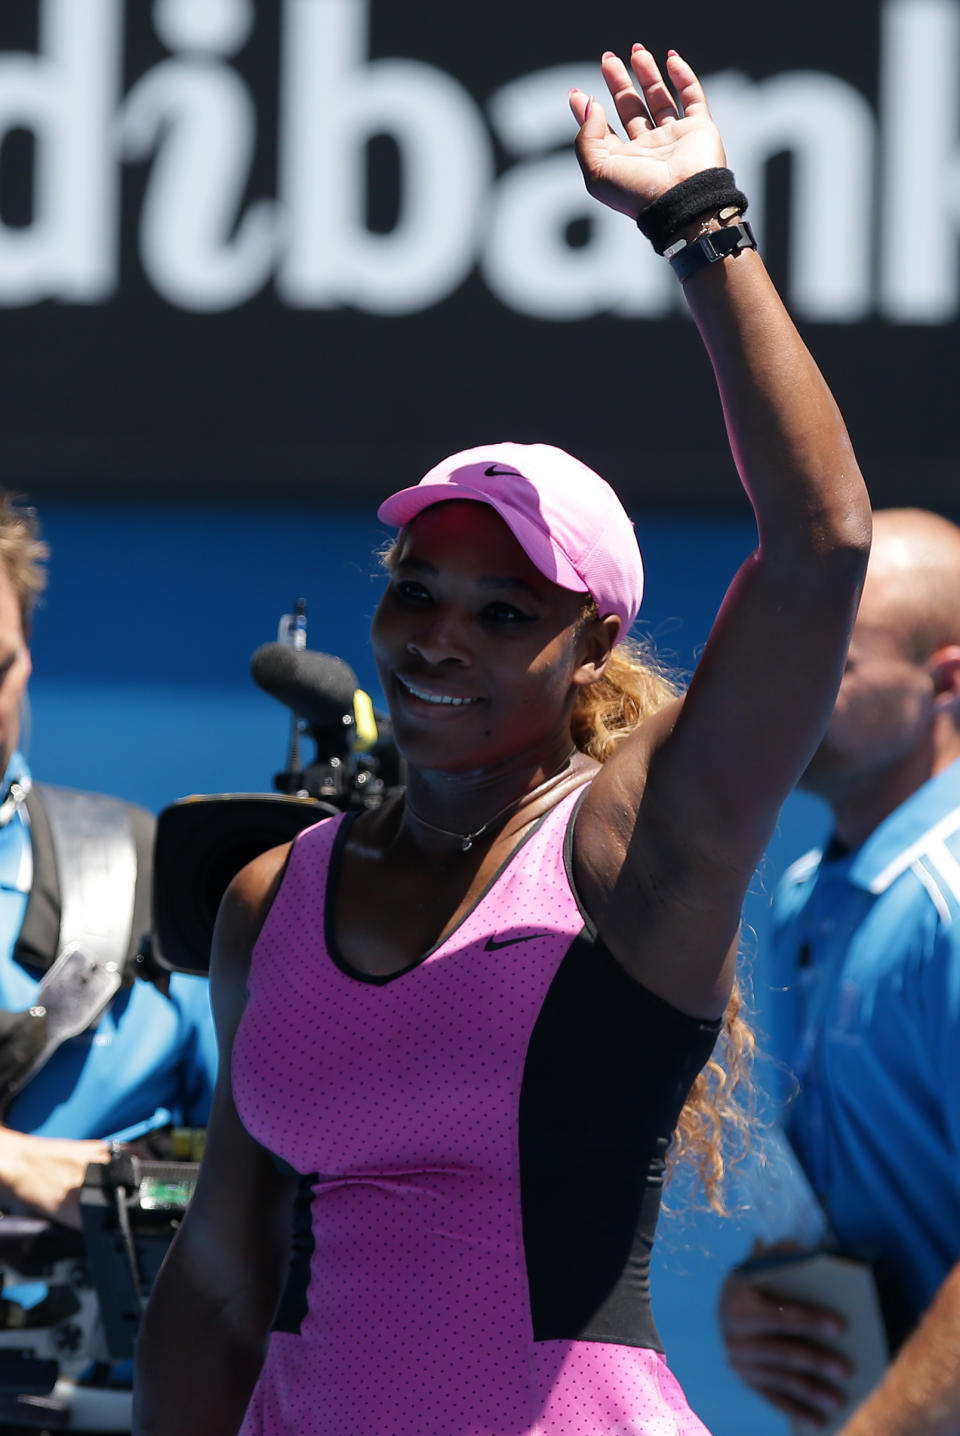 Serena Williams of the U.S. celebrates after defeating Daniela Hantuchova of Slovakia in their third round match at the Australian Open tennis championship in Melbourne, Australia, Friday, Jan. 17, 2014.(AP Photo/Aaron Favila)